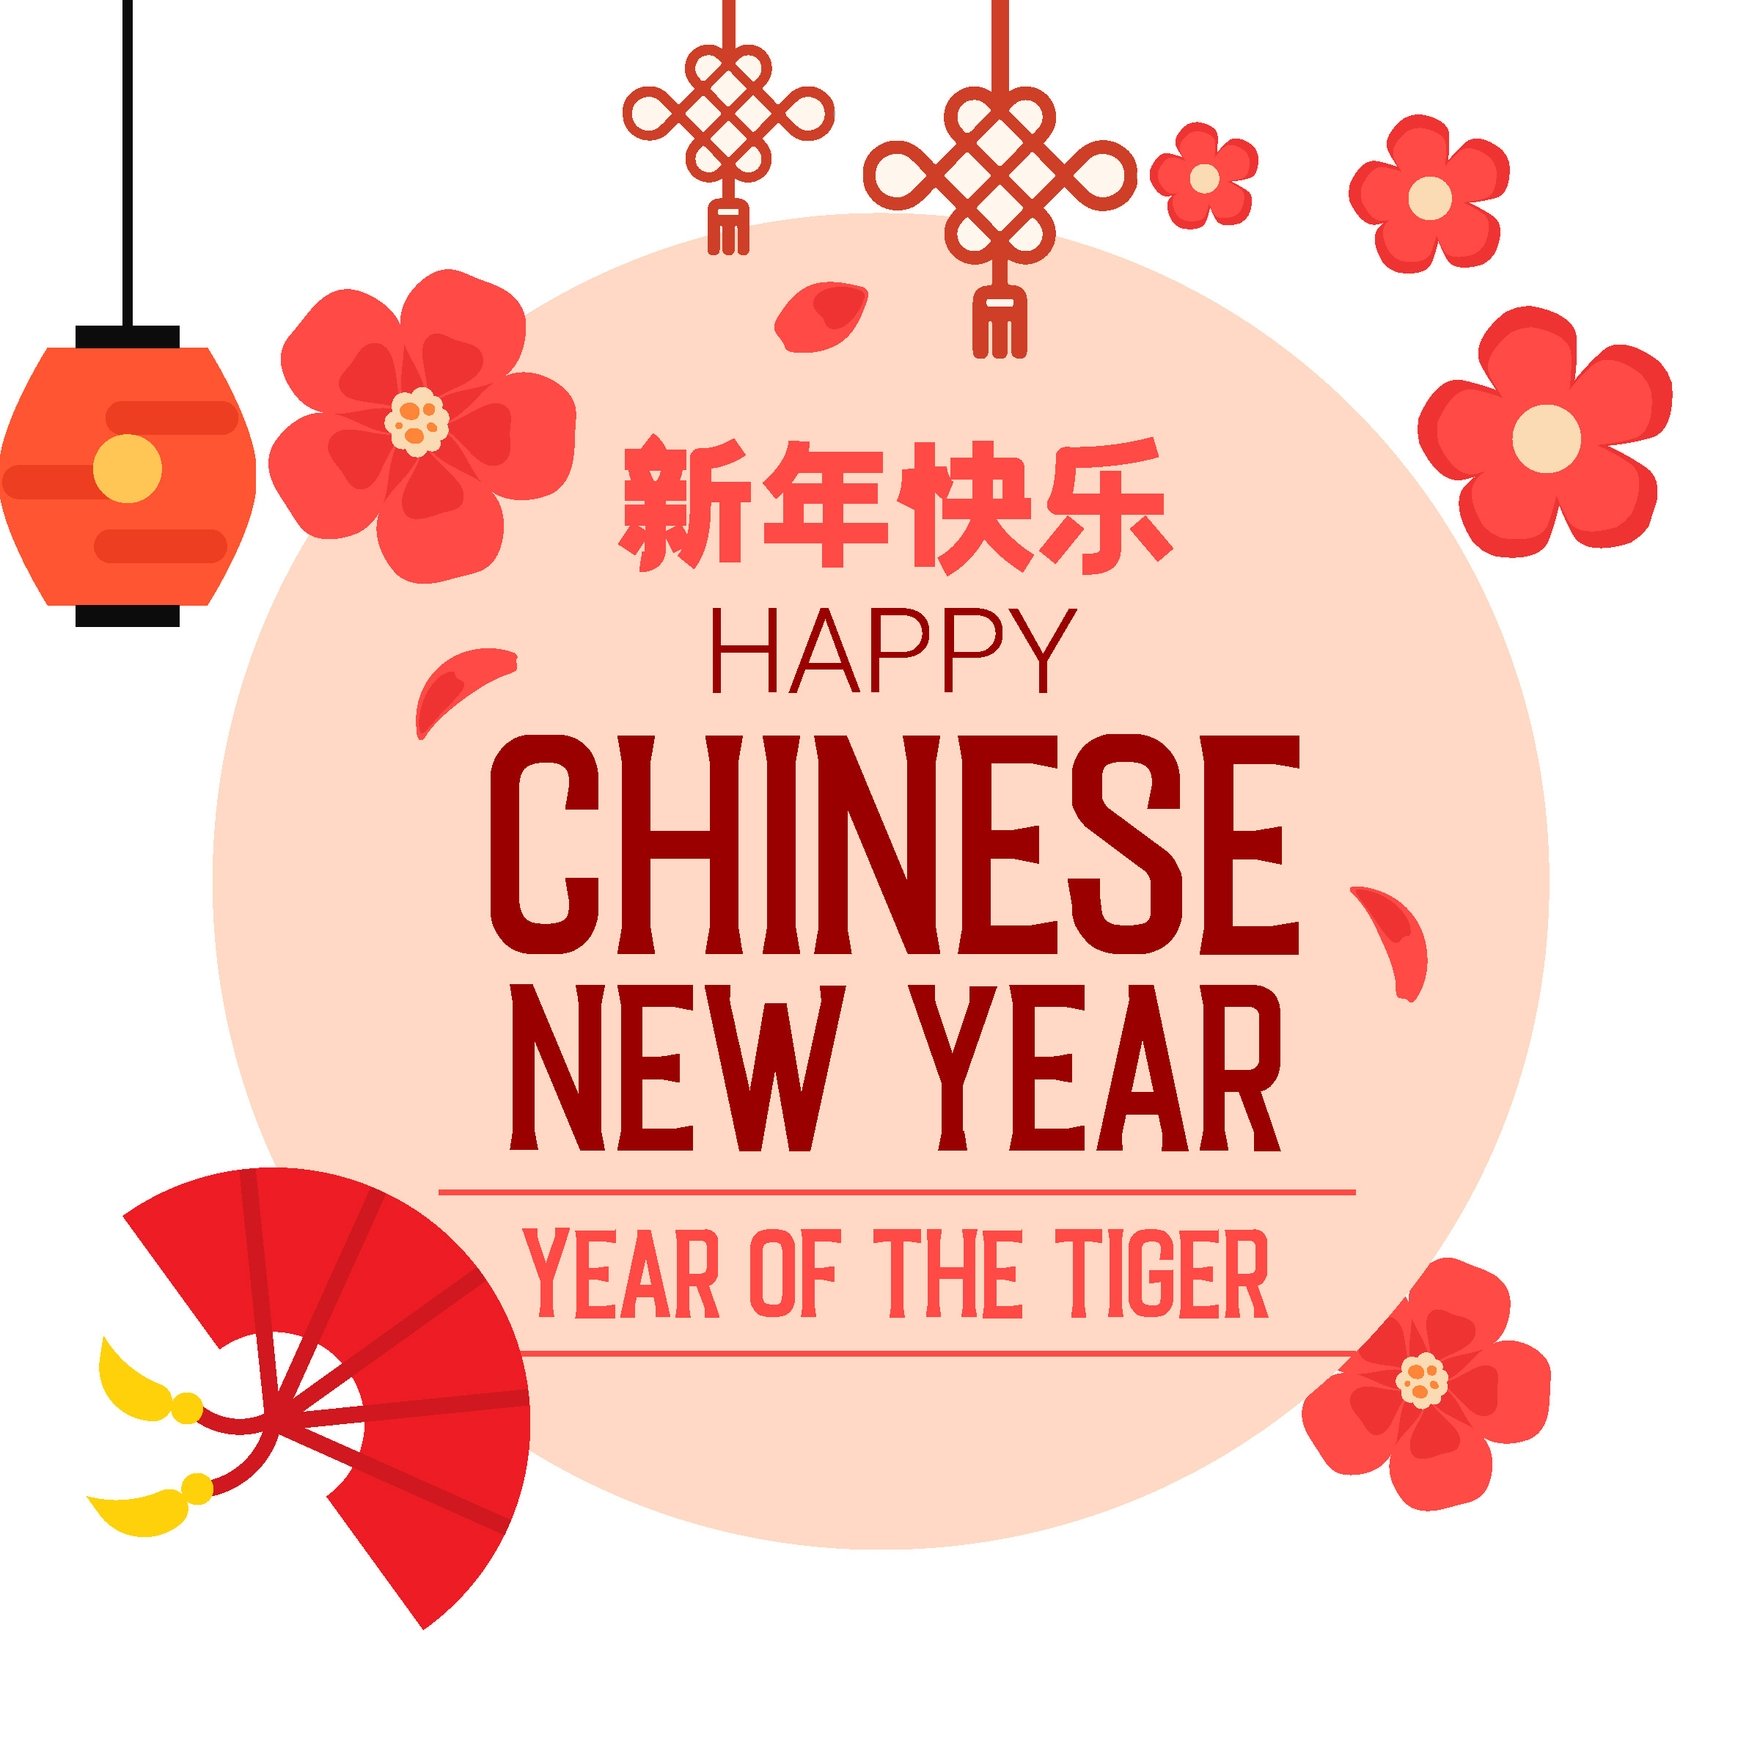 Chinese New Year Icon Vector in PDF, Illustrator, PSD, EPS, SVG, JPG, PNG